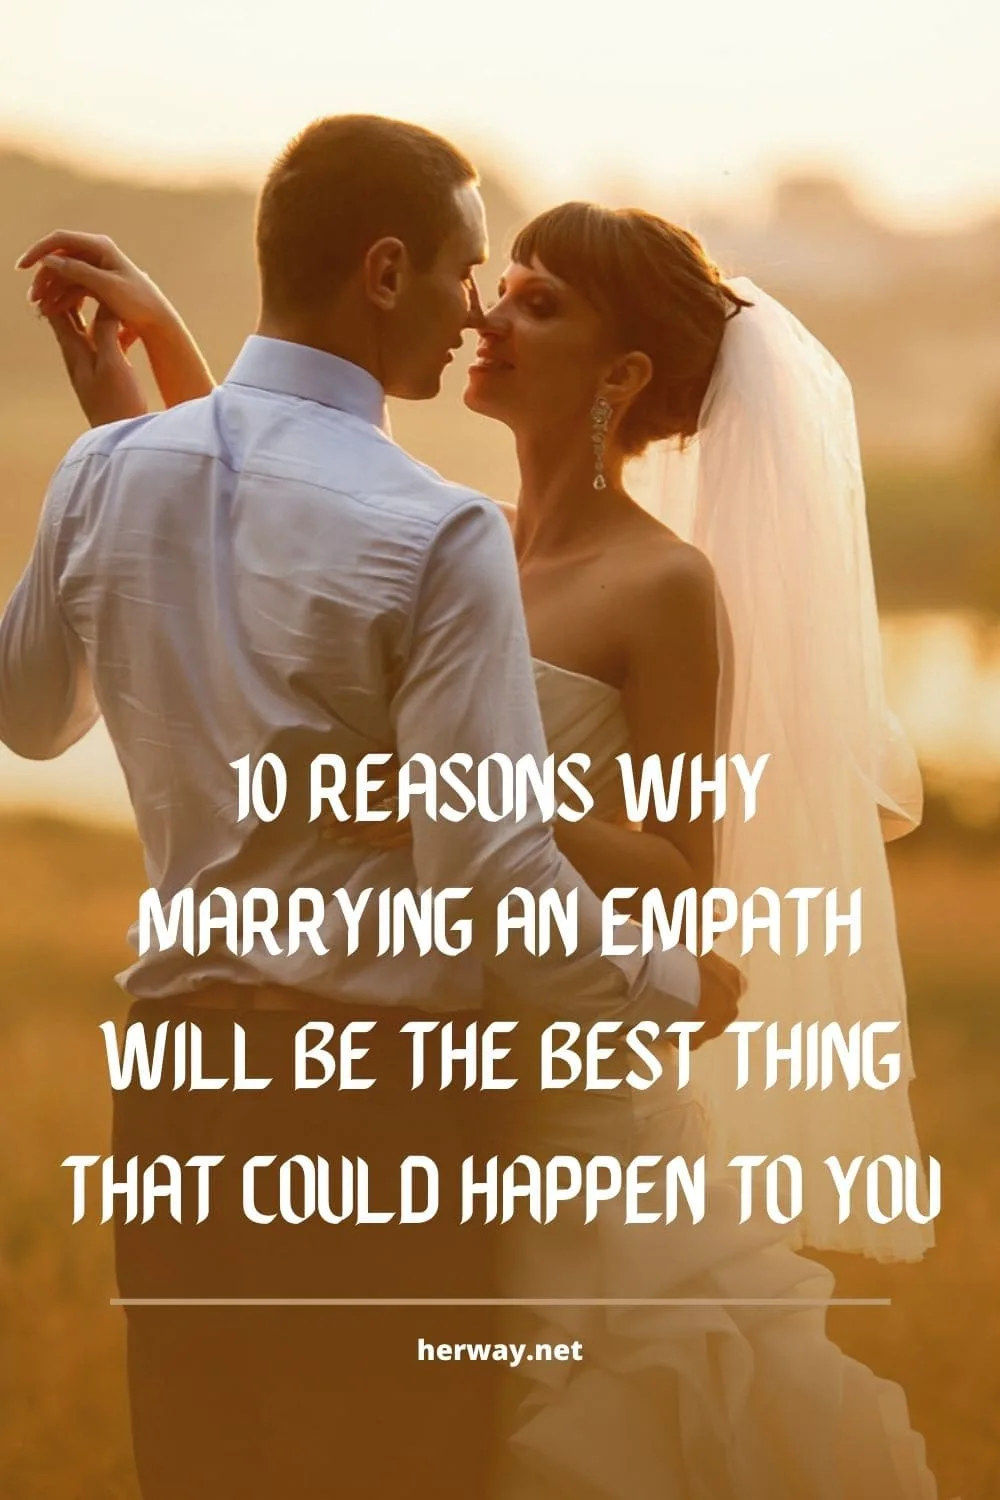 10 Reasons Why Marrying An Empath Will Be The Best Thing That Could Happen To You